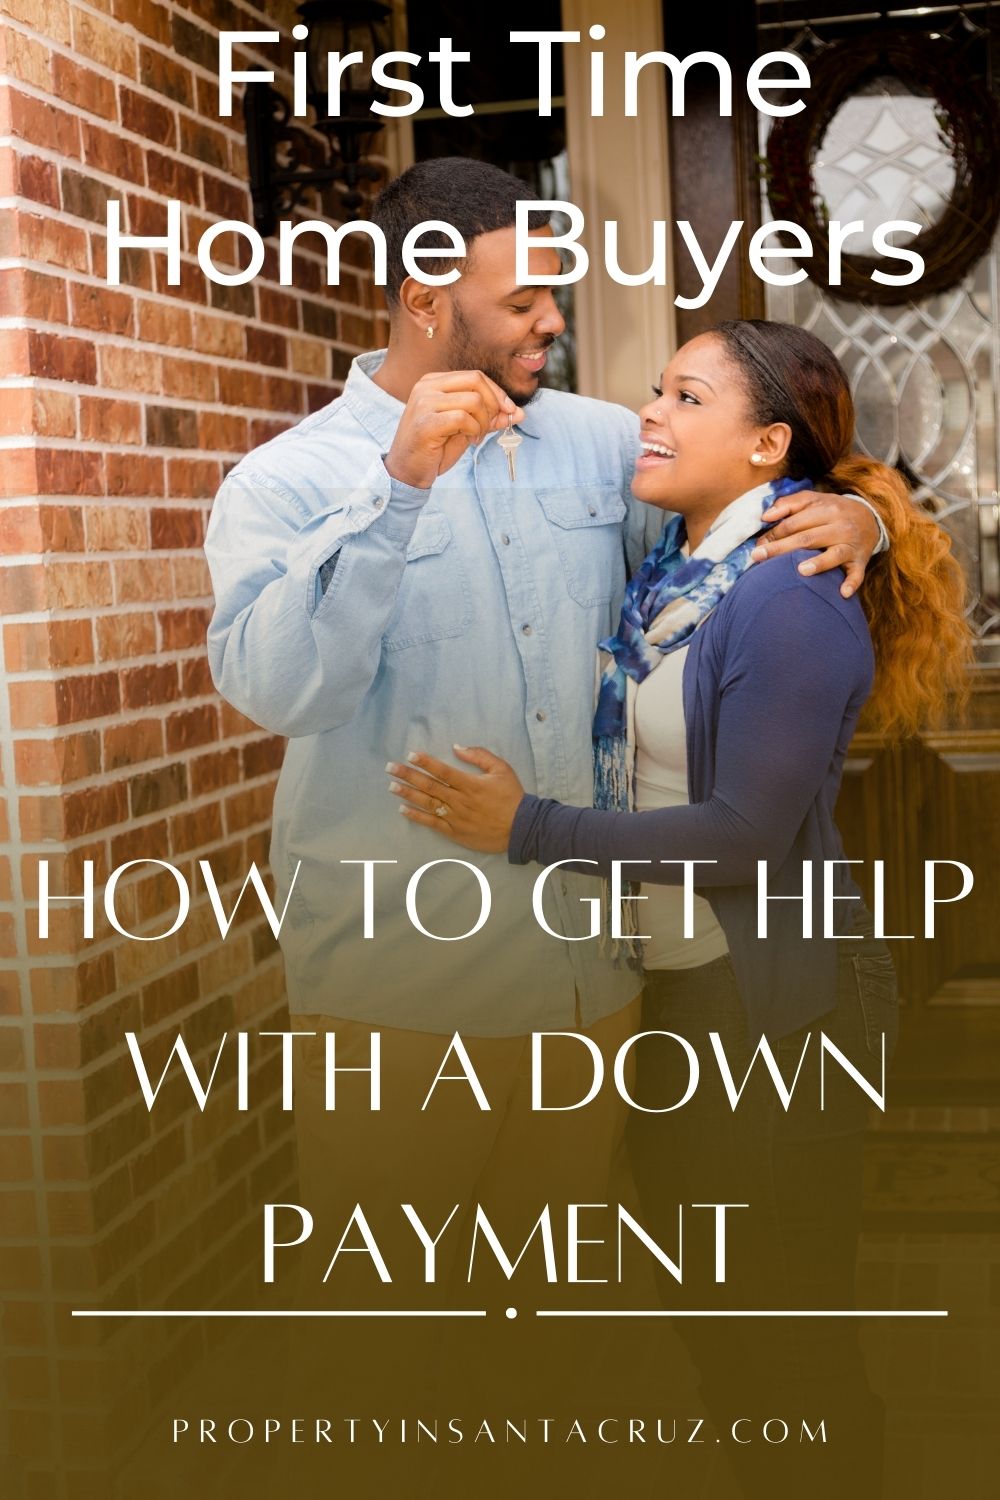 First Time Homebuyers How to Get Help with a Down Payment